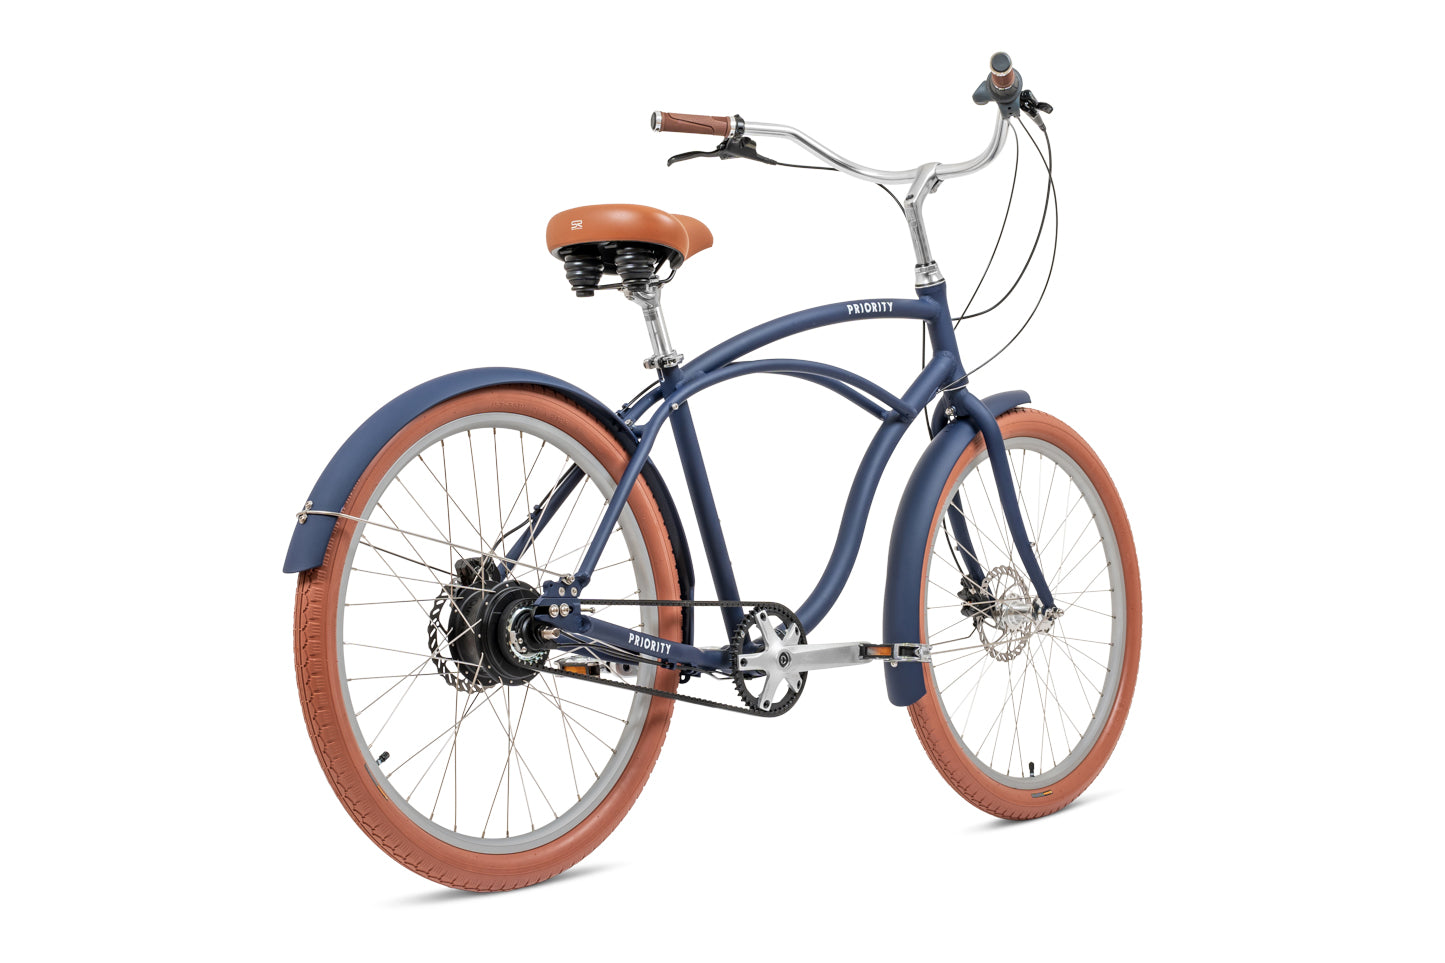 Rust Free Brass Bell – Priority Bicycles